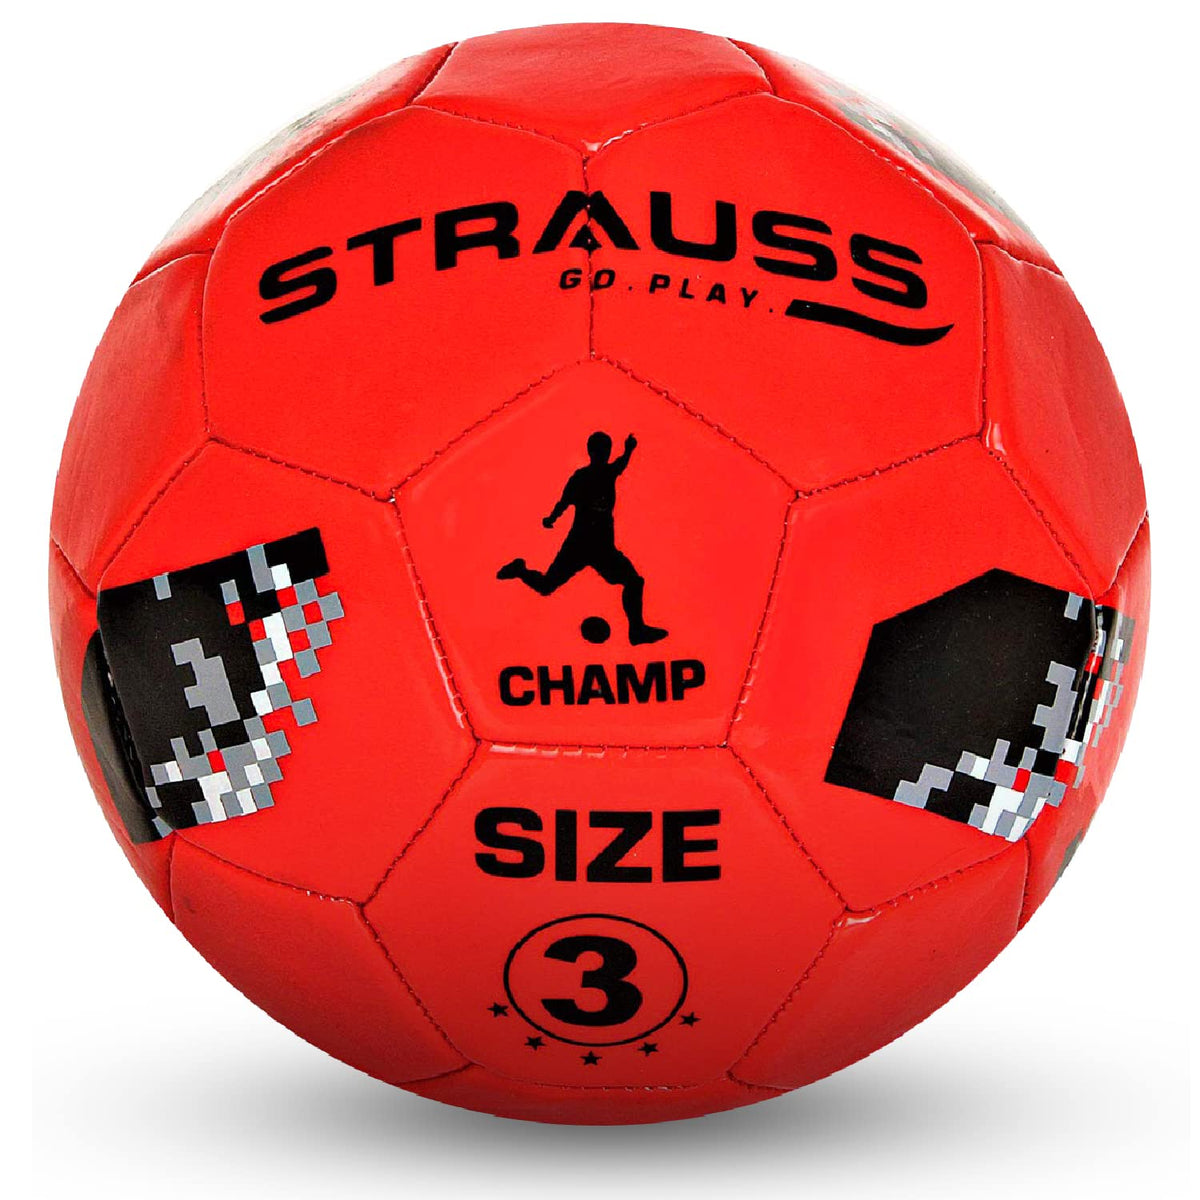 Strauss Official Basketball Size 3 | Professional Match Ball for Indoor & Outdoor Games & Training for Kids & Adults | Superior & Soft Grip with Granular Texture & High-Performance Grained Rubber Surface, (Red)